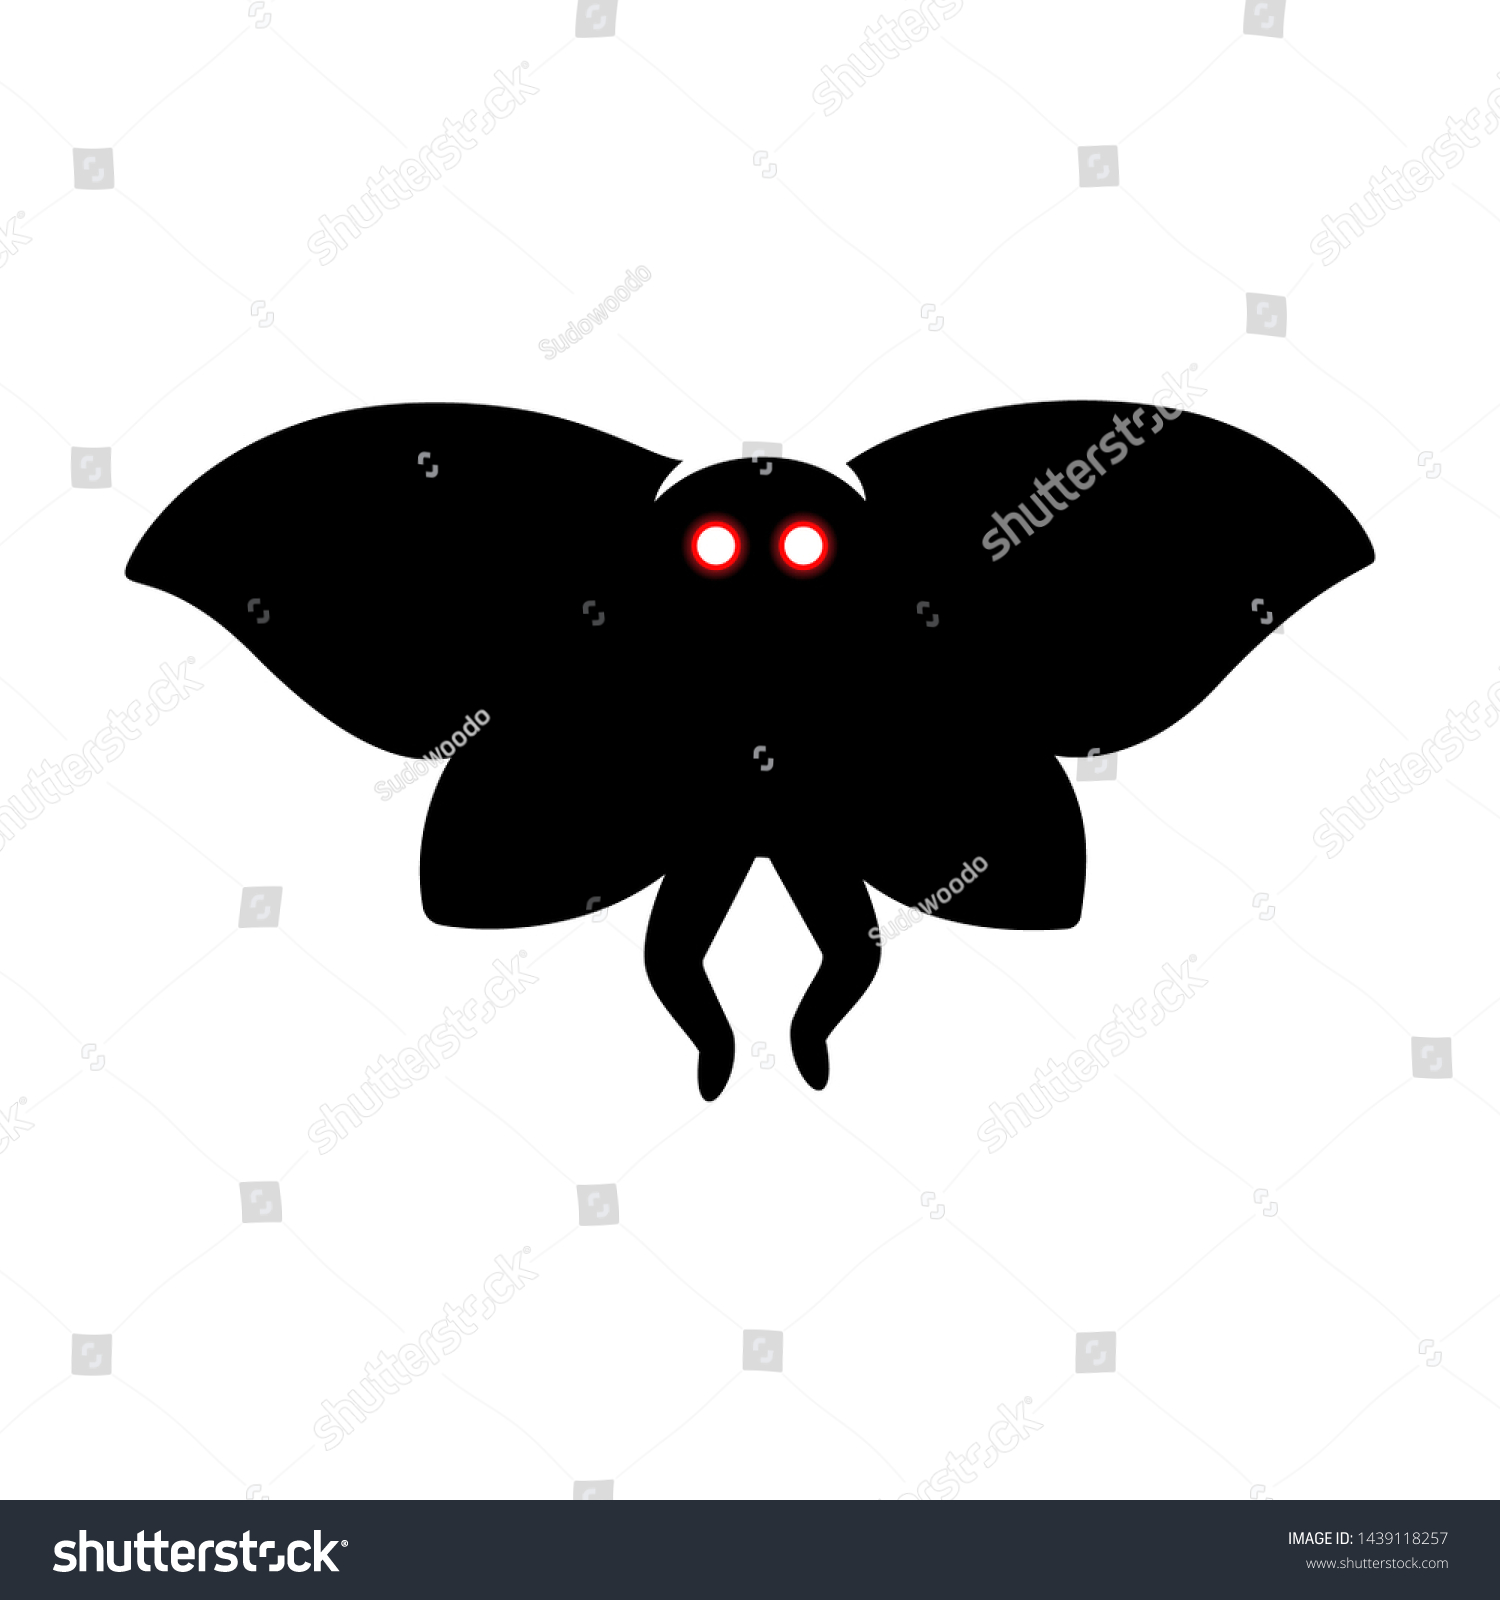 SVG of Mothman monster, paranormal cryptid creature from West Virginia folklore. Creepy silhouette vector illustration. svg